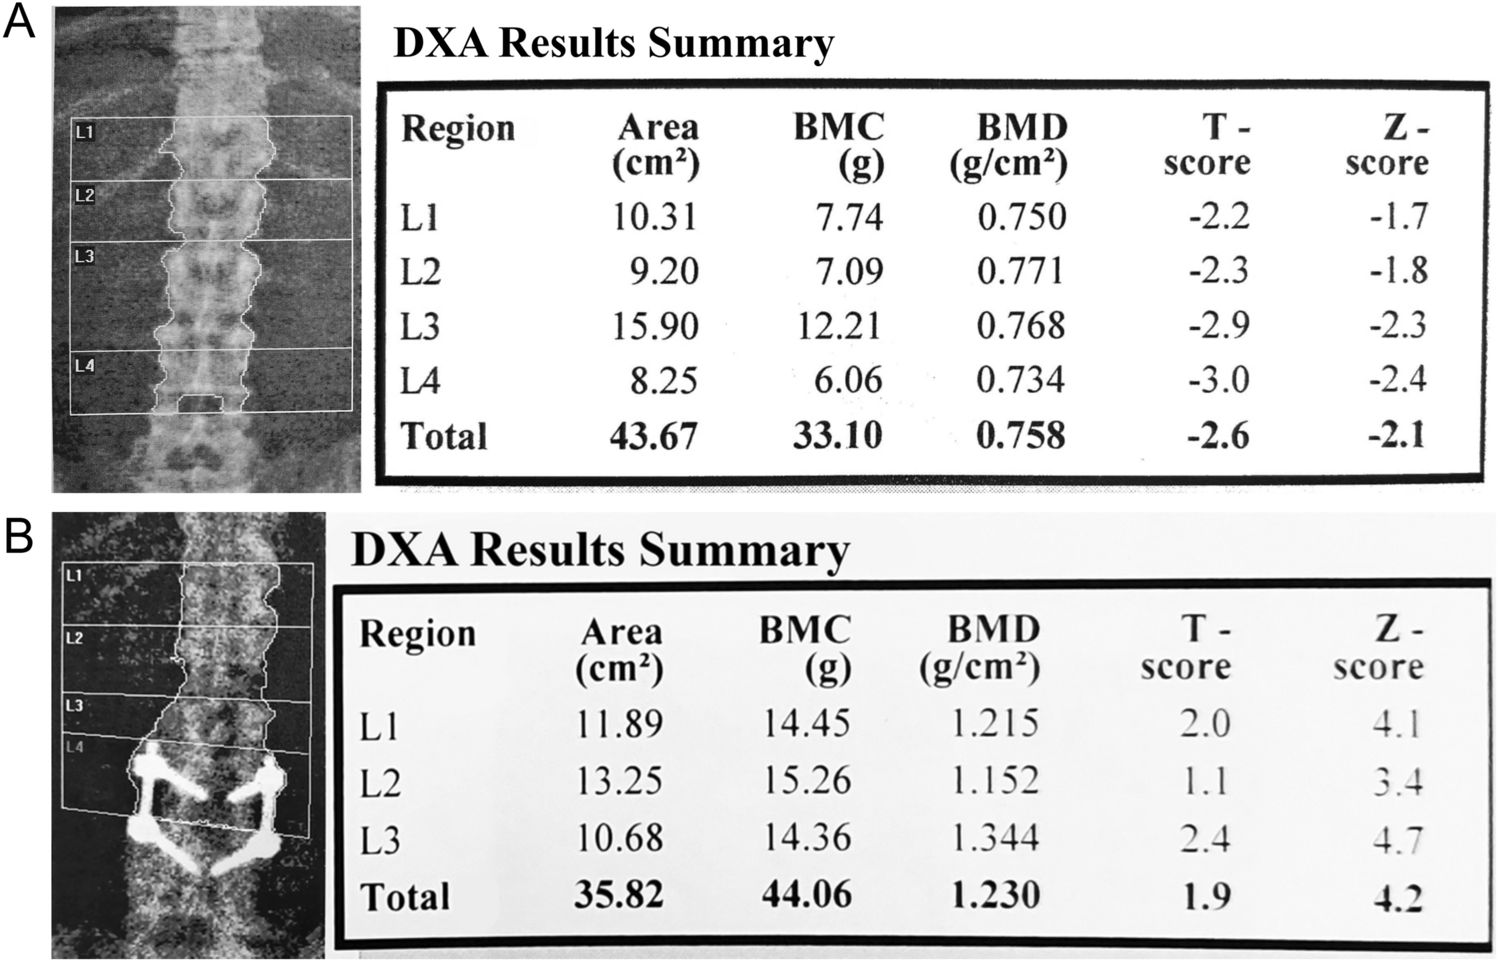 Bone densitometry in Thalassemia major: a closer look at pitfalls and operator-related errors in a 10-year follow-up population